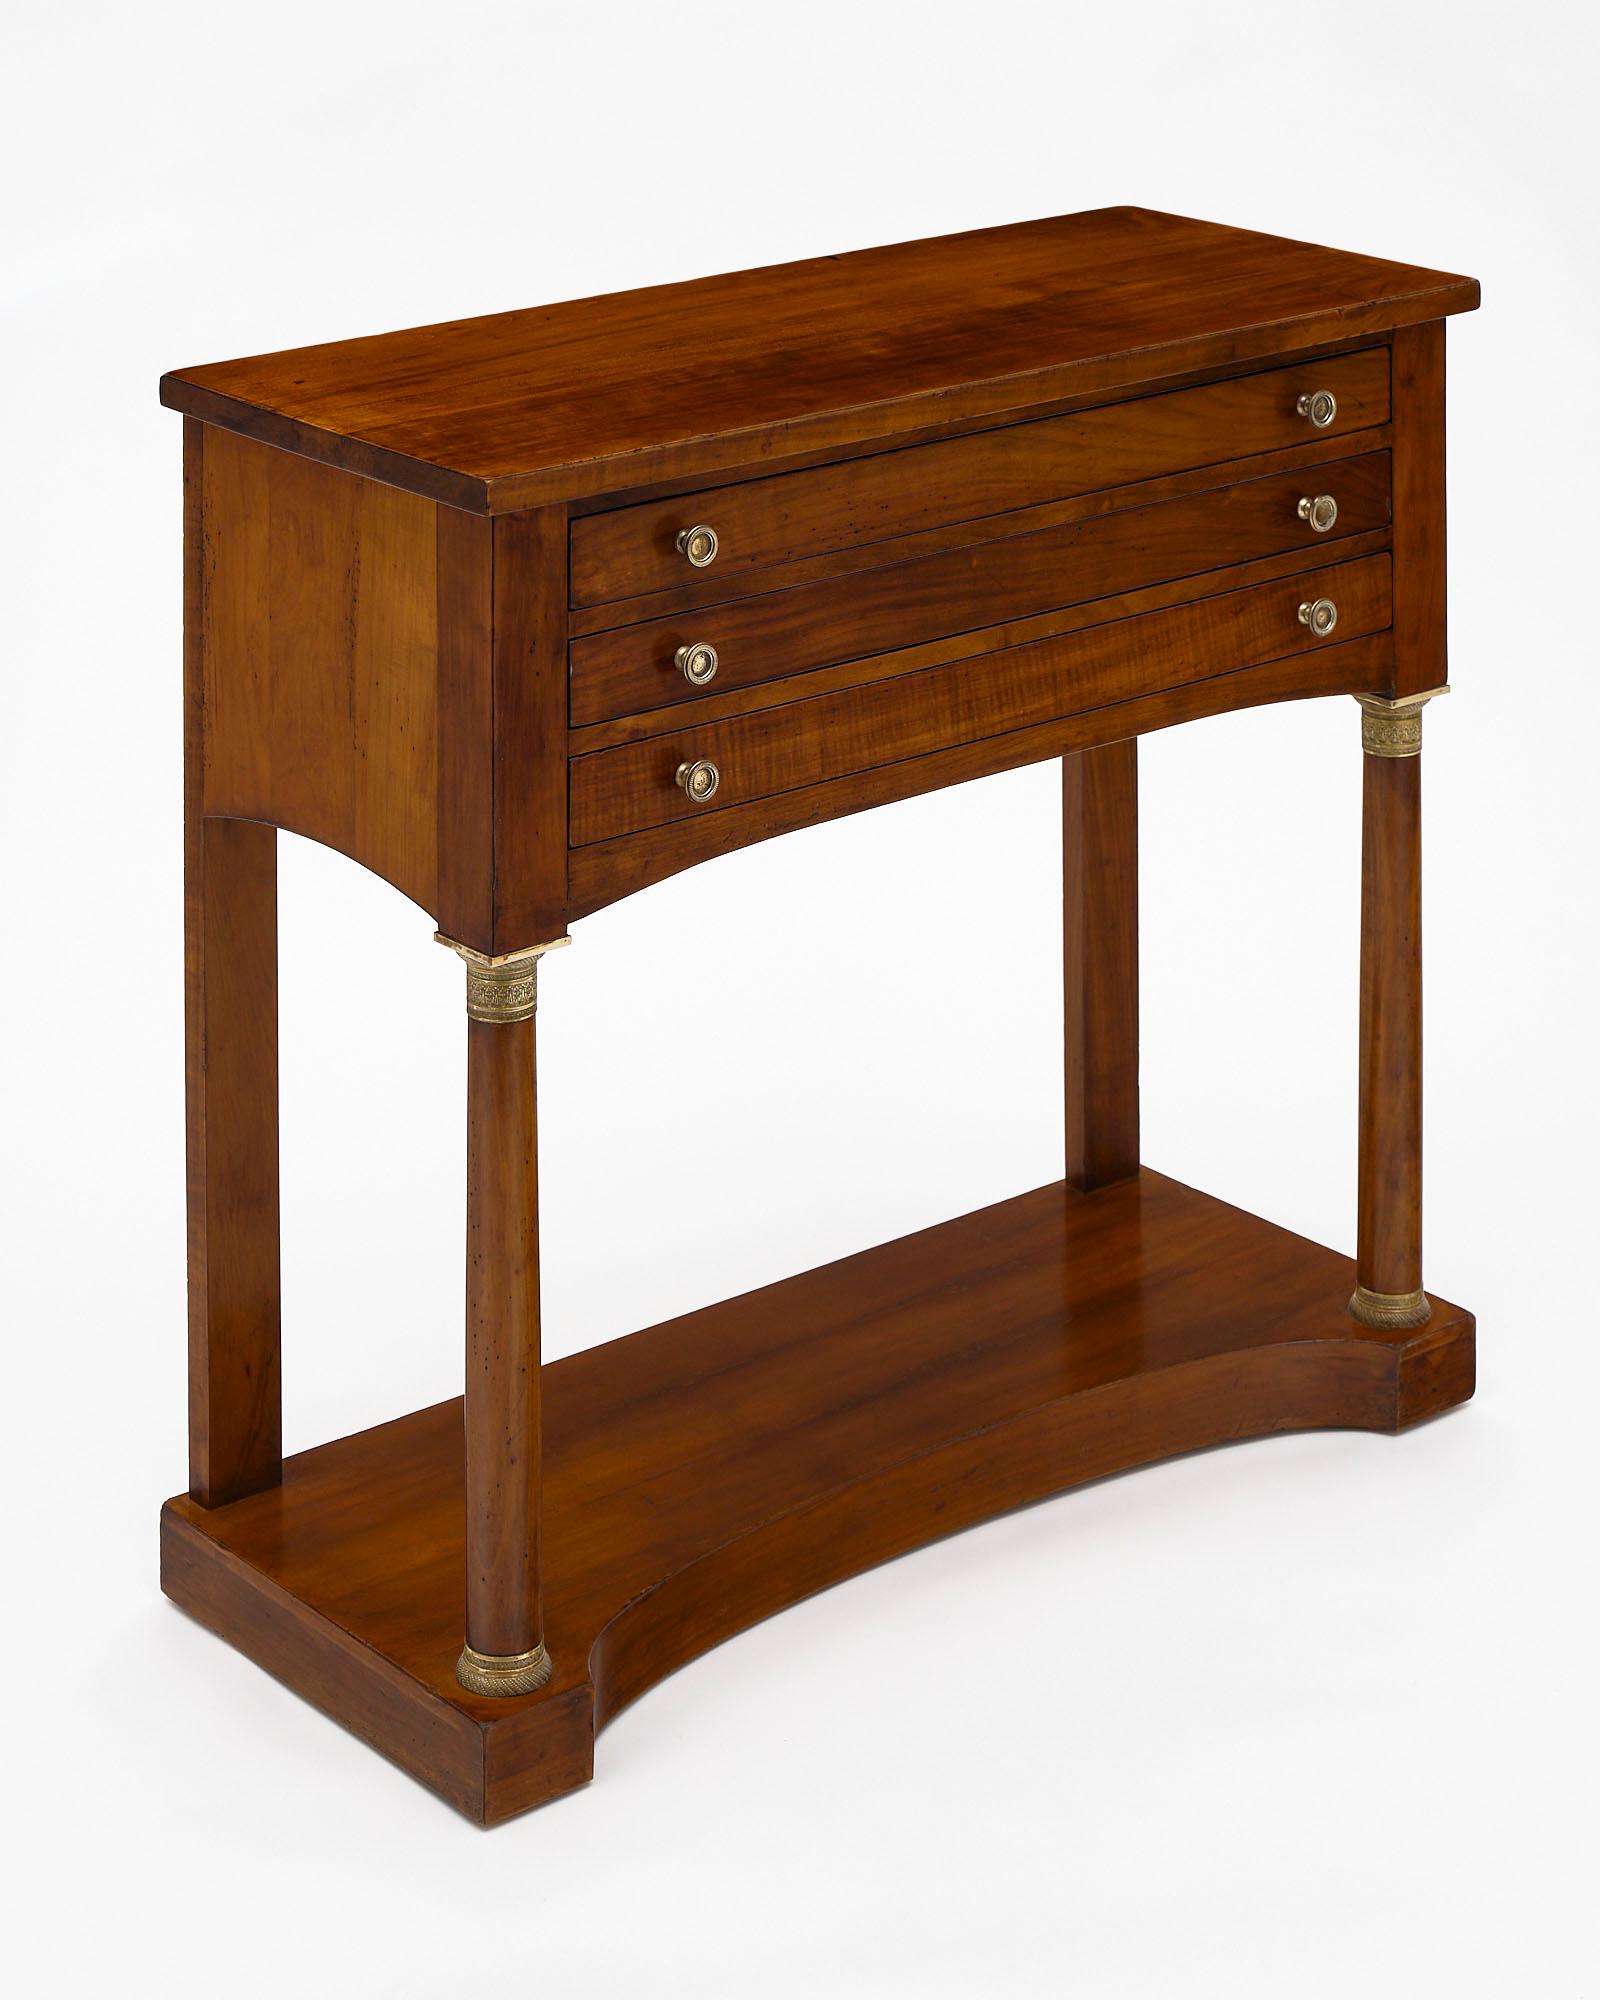 French antique Empire console table or “argentier” made of mahogany with oak as a secondary wood. We love the French Empire style and the three dovetailed drawers featuring finely cast hardware. This is a striking piece!